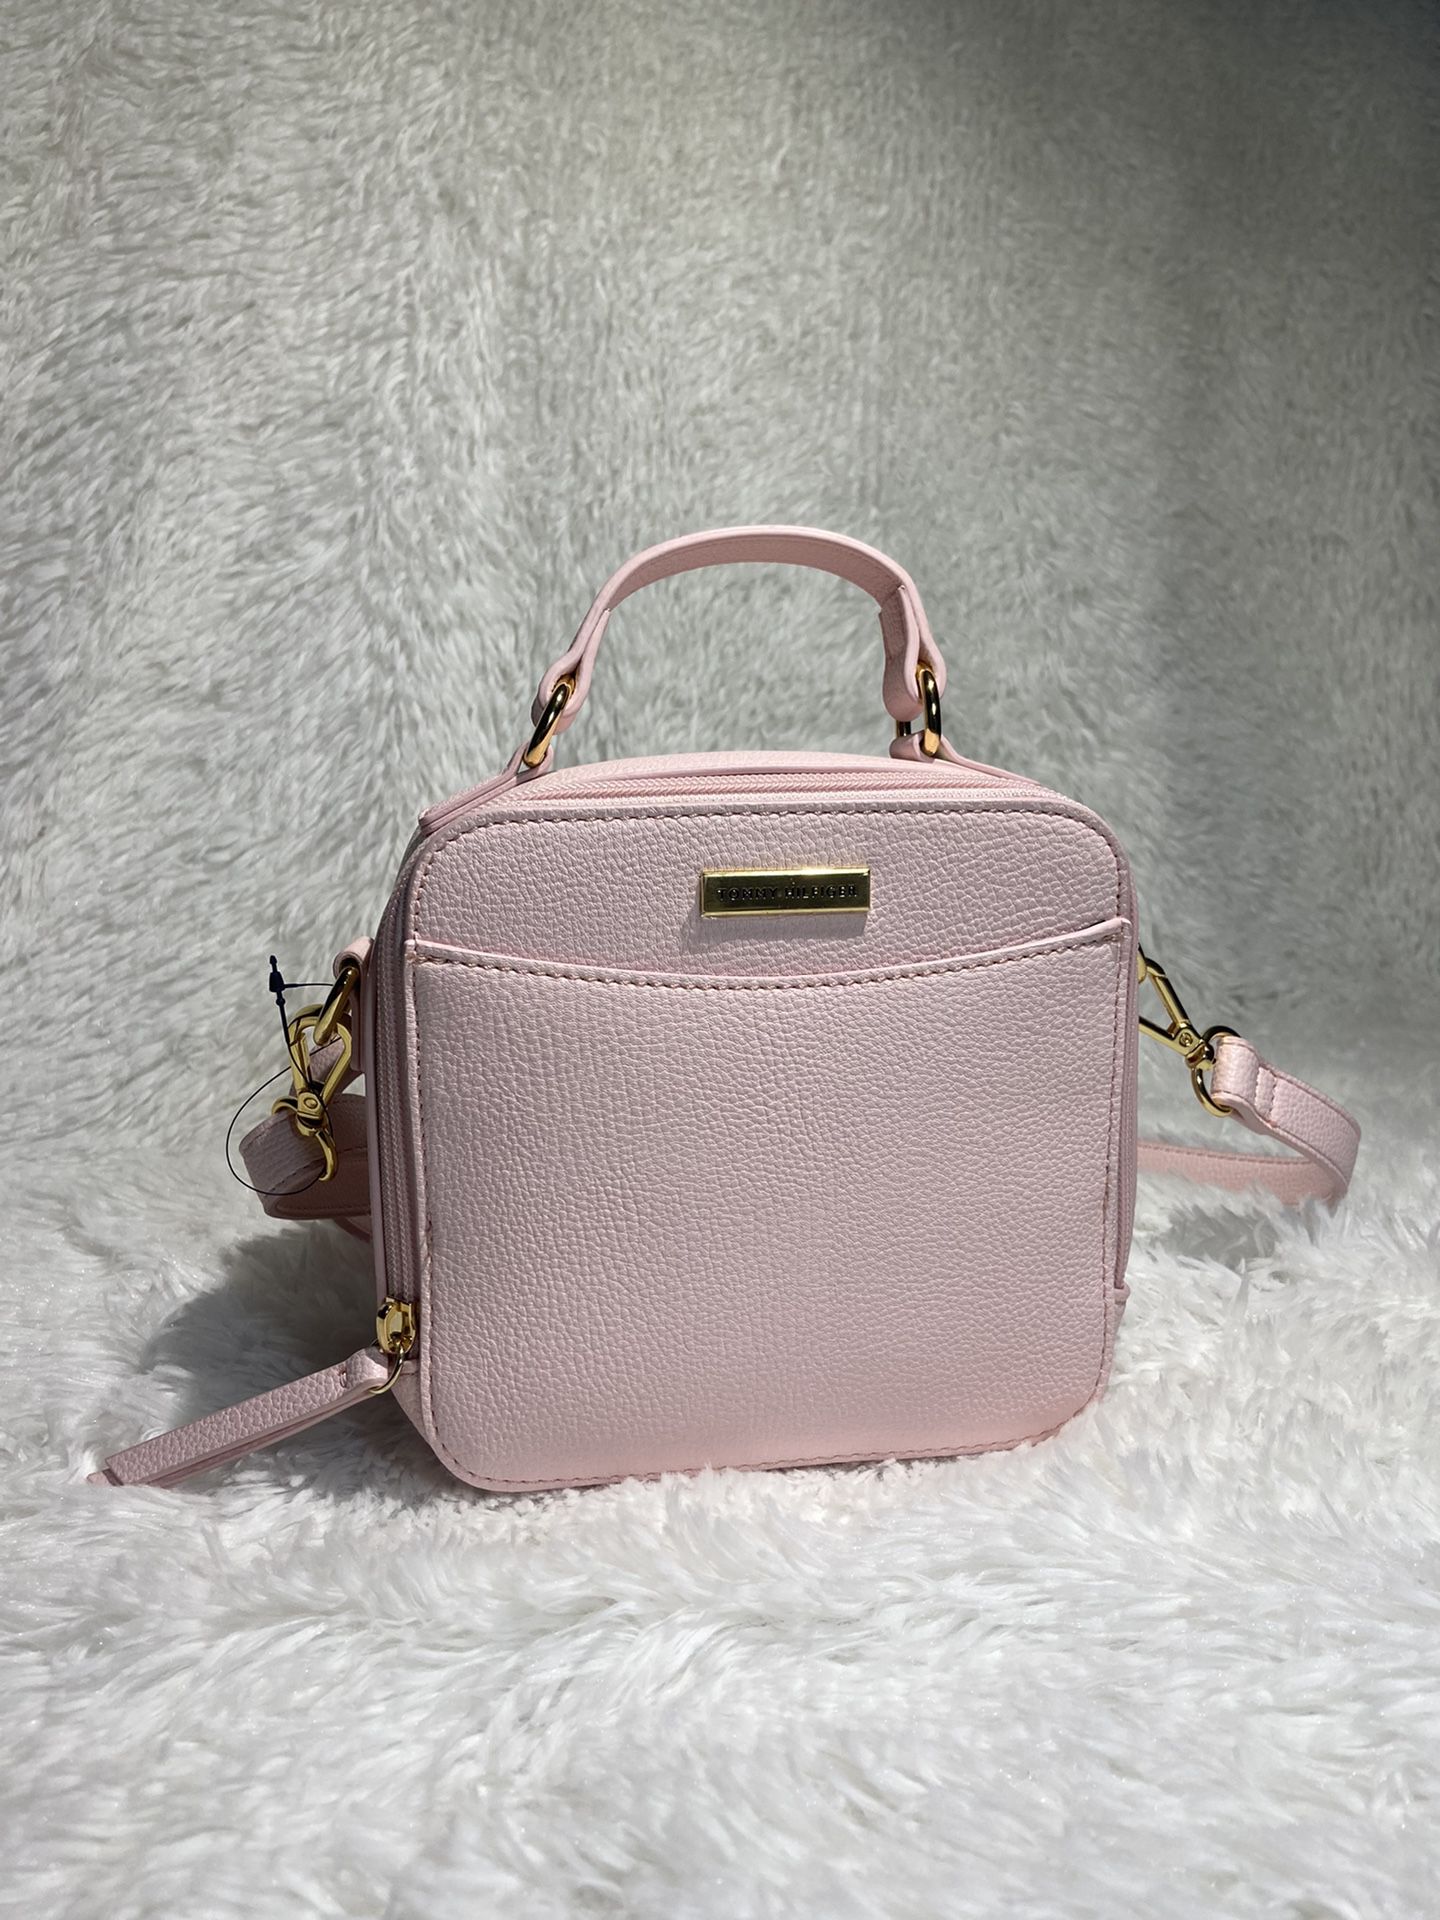 Tommy Hilfiger Pink Across Body Lunch Box Bag